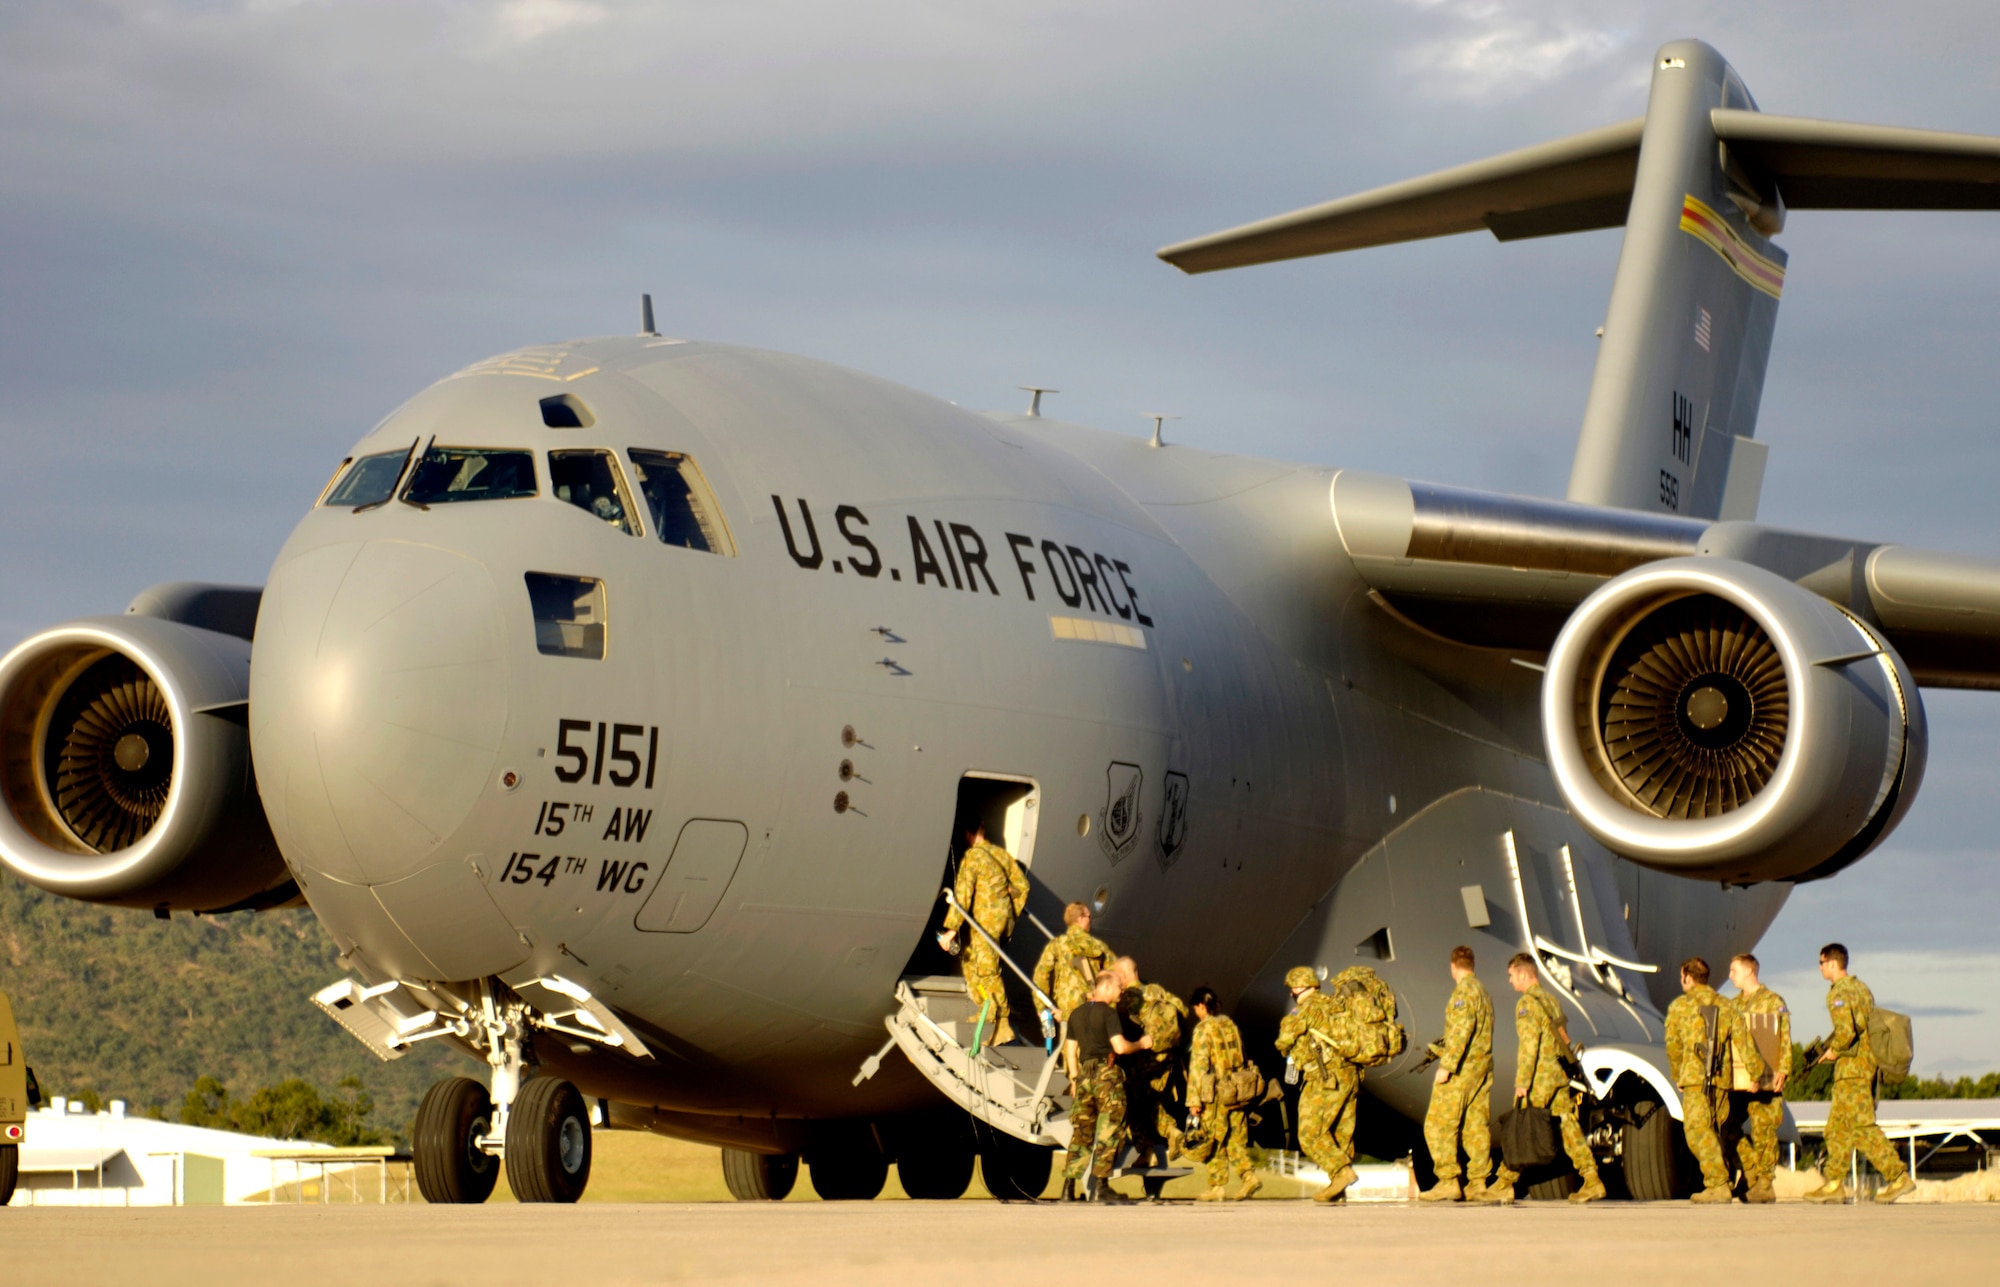 Australian Defense Forces board a C-17 Globemaster III at Royal Australian Air Force Base Townsville, Australia, on Tuesday, May 30, 2006. Two C-17s from the 15th Airlift Wing and the Hawaii Air National Guard's 154th Wing at Hickam Air Force Base, Hawaii, are helping the Australian Defense Force reposition its forces in Australia to better support peace operations in East Timor. (U.S. Air Force photo by Tech. Sgt. Shane A. Cuomo) 